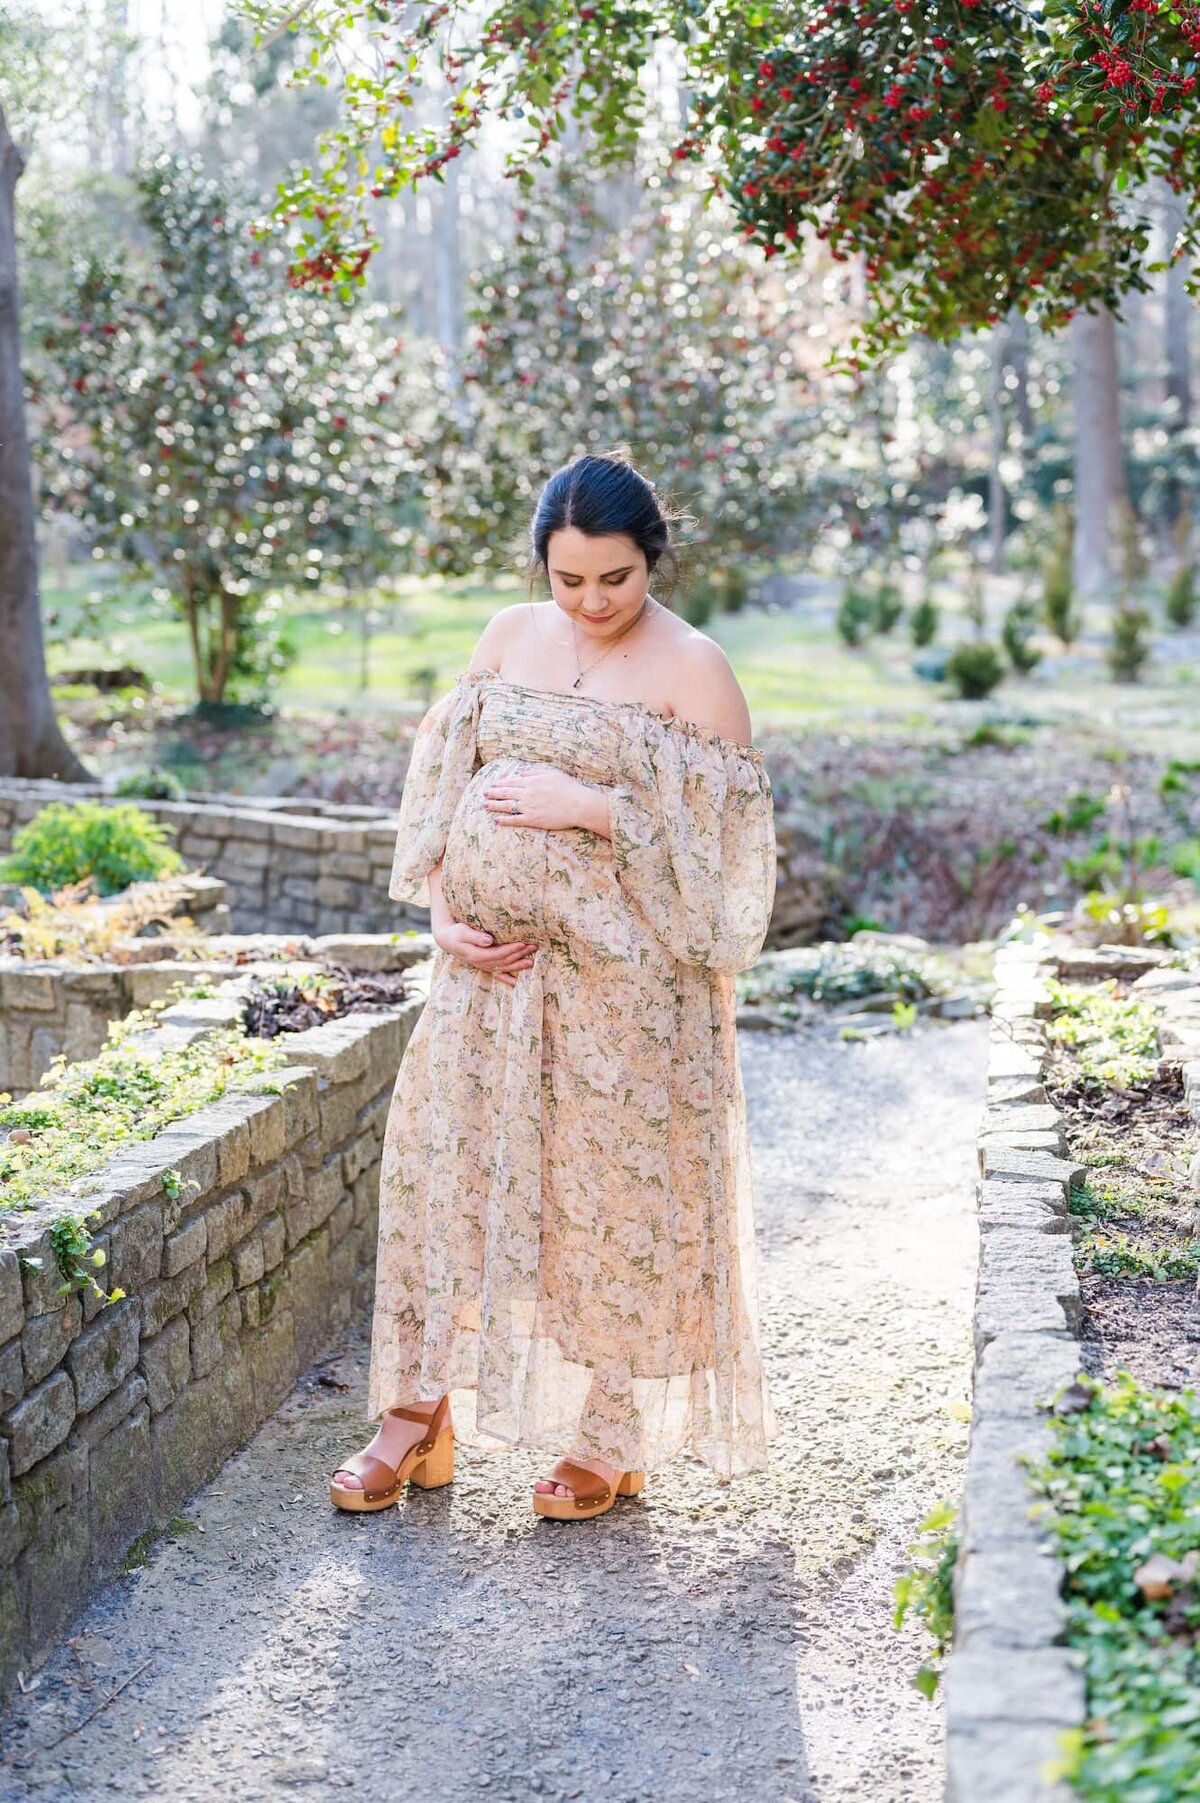 Elli-Row-Photography-Cator-Woolford-Maternity_3568-2_1